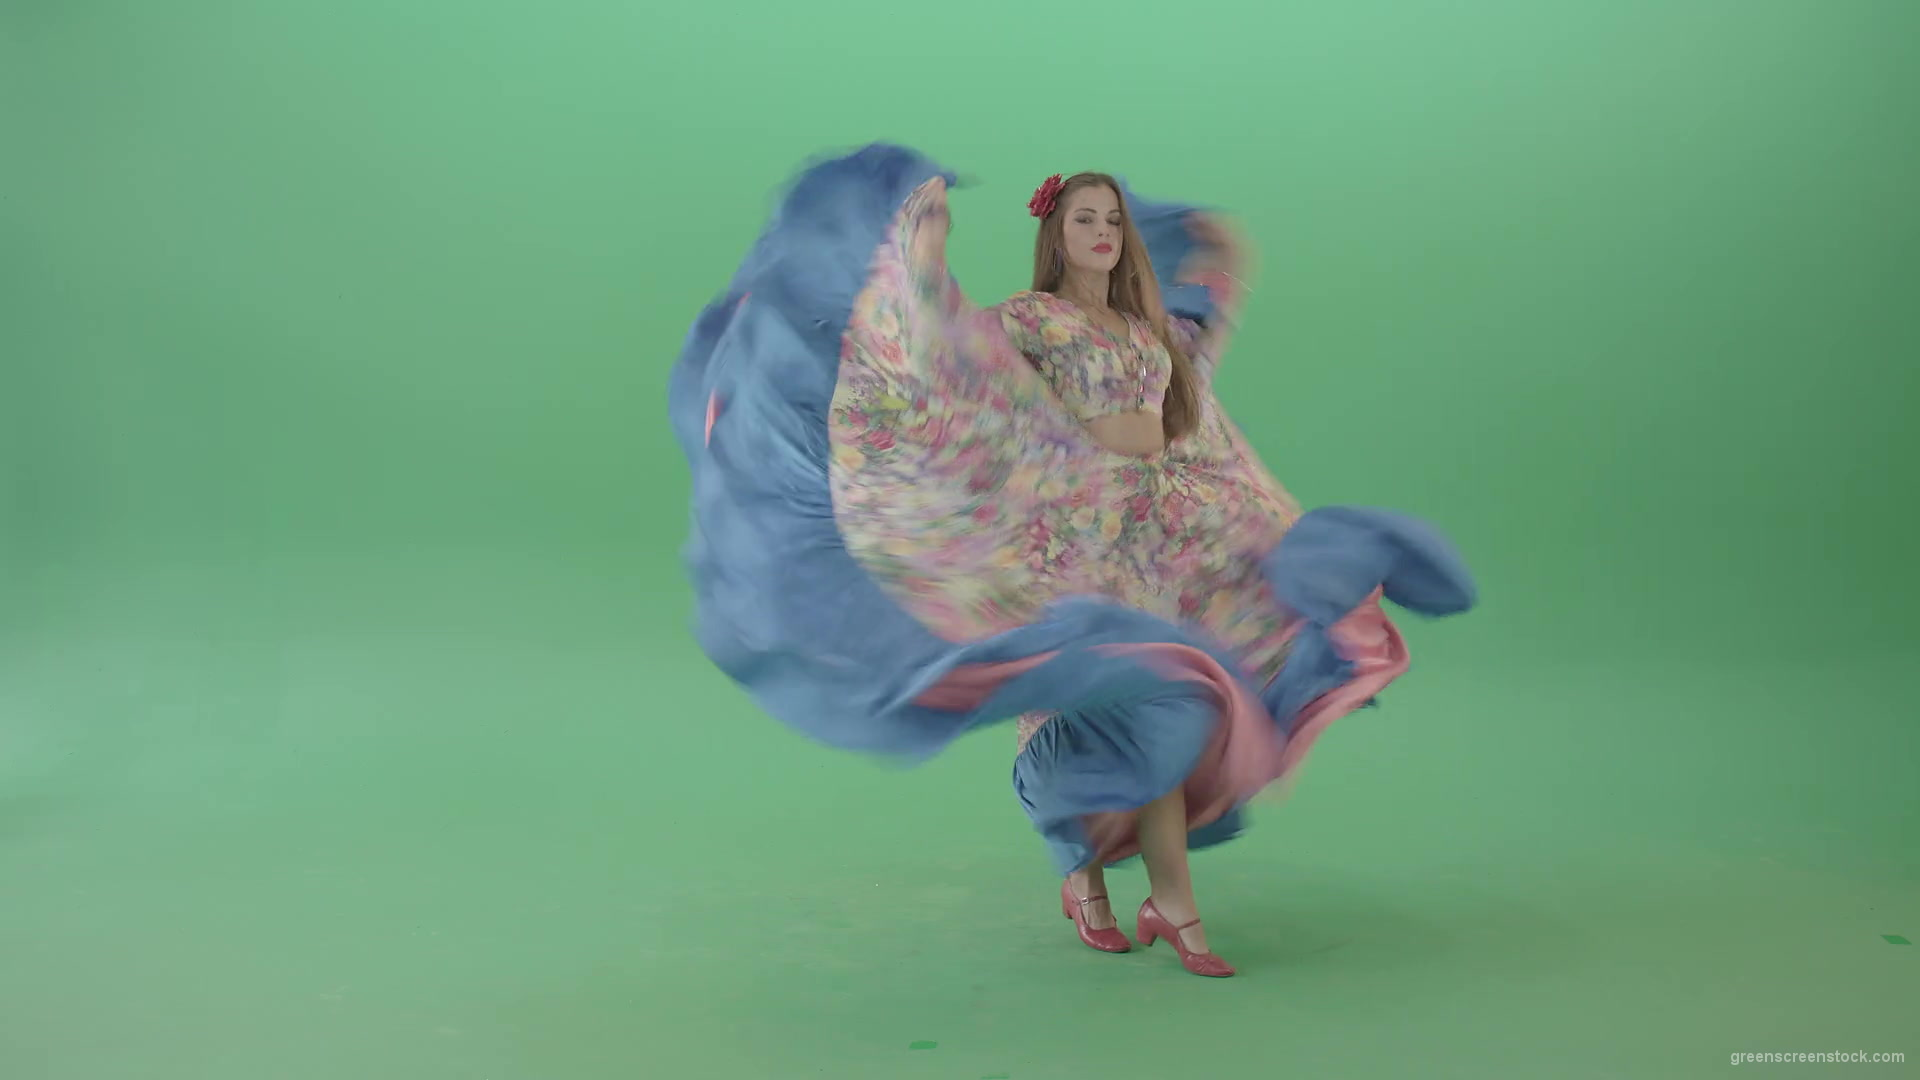 Roma-gipsy-woman-dancing-in-colorful-costume-isolated-on-Green-Screen-4K-Video-Footage-1920_002 Green Screen Stock